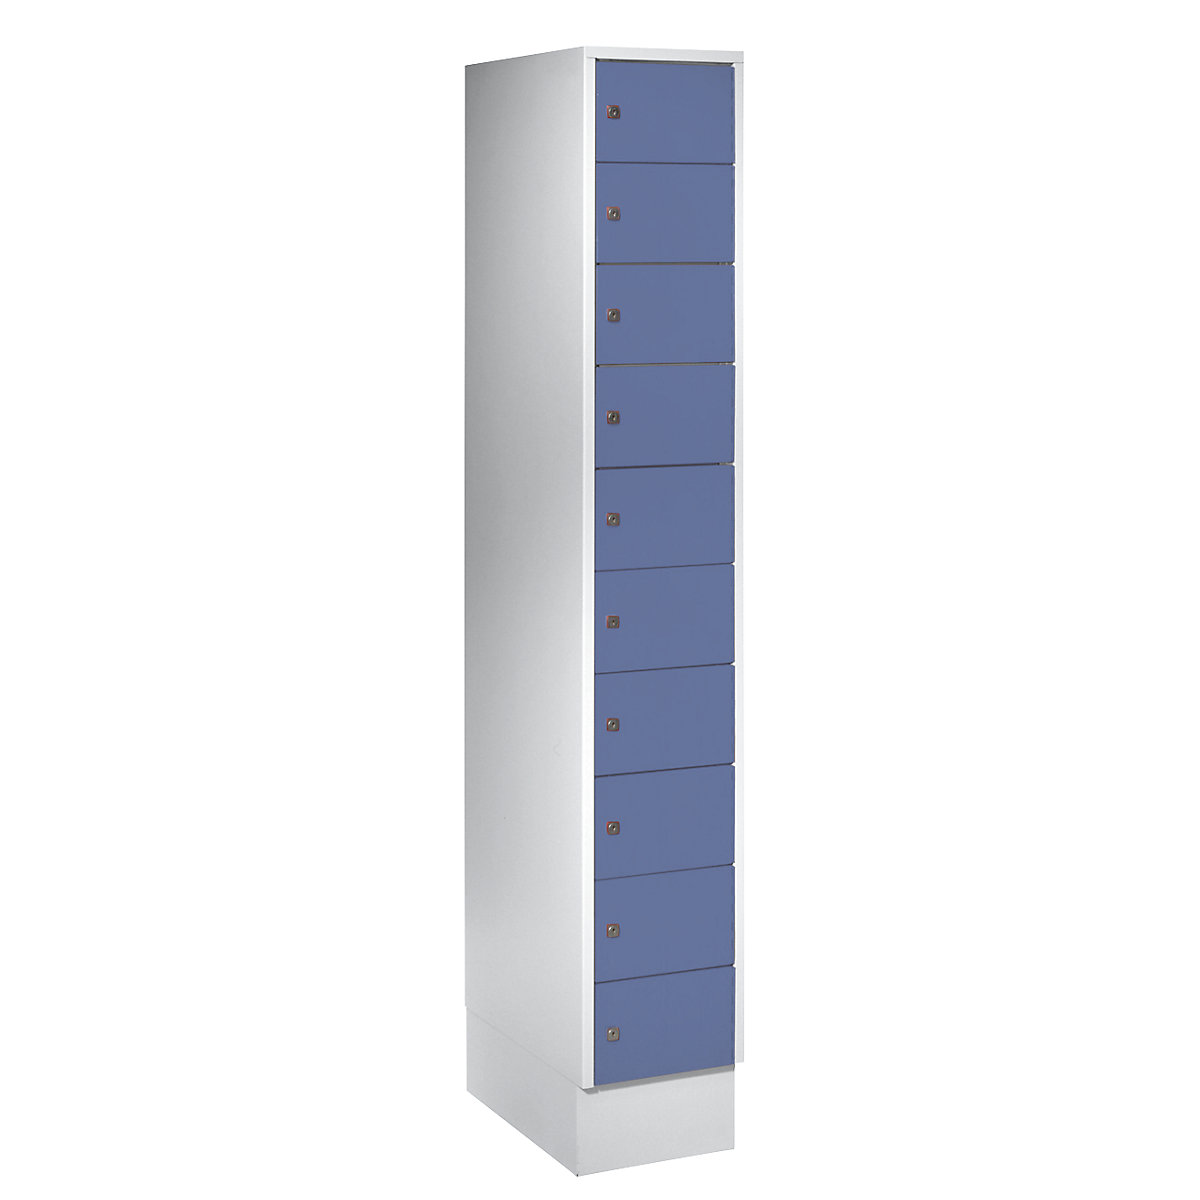 Small locker cupboard – Wolf, 10 compartments, HxW 1850 x 300 mm, door colour pigeon blue RAL 5014